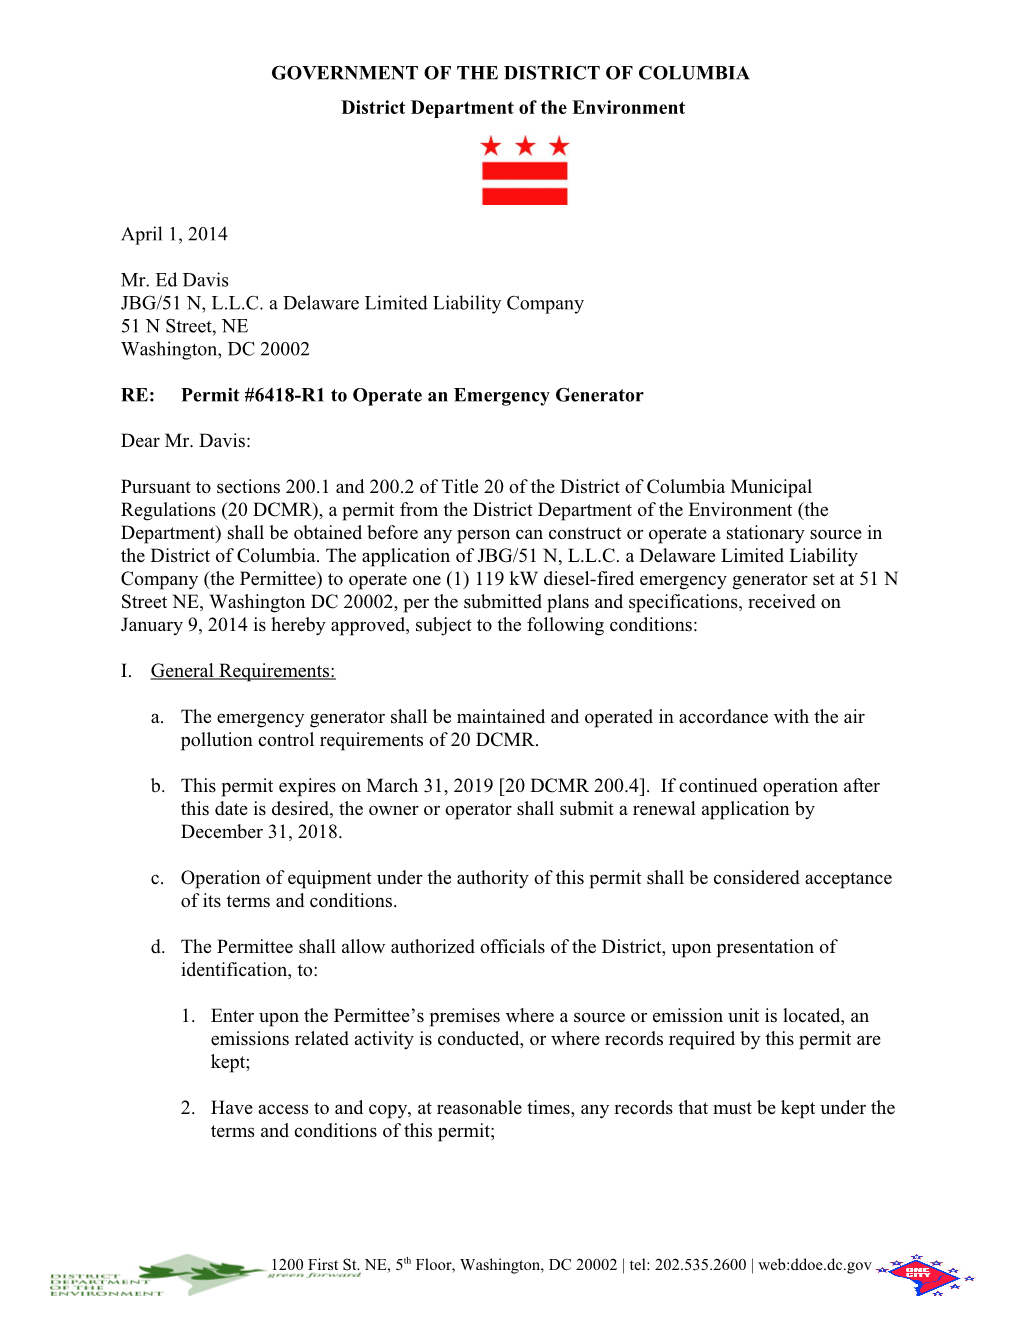 Permit # 6418-R1 to Operate an Emergency Generator